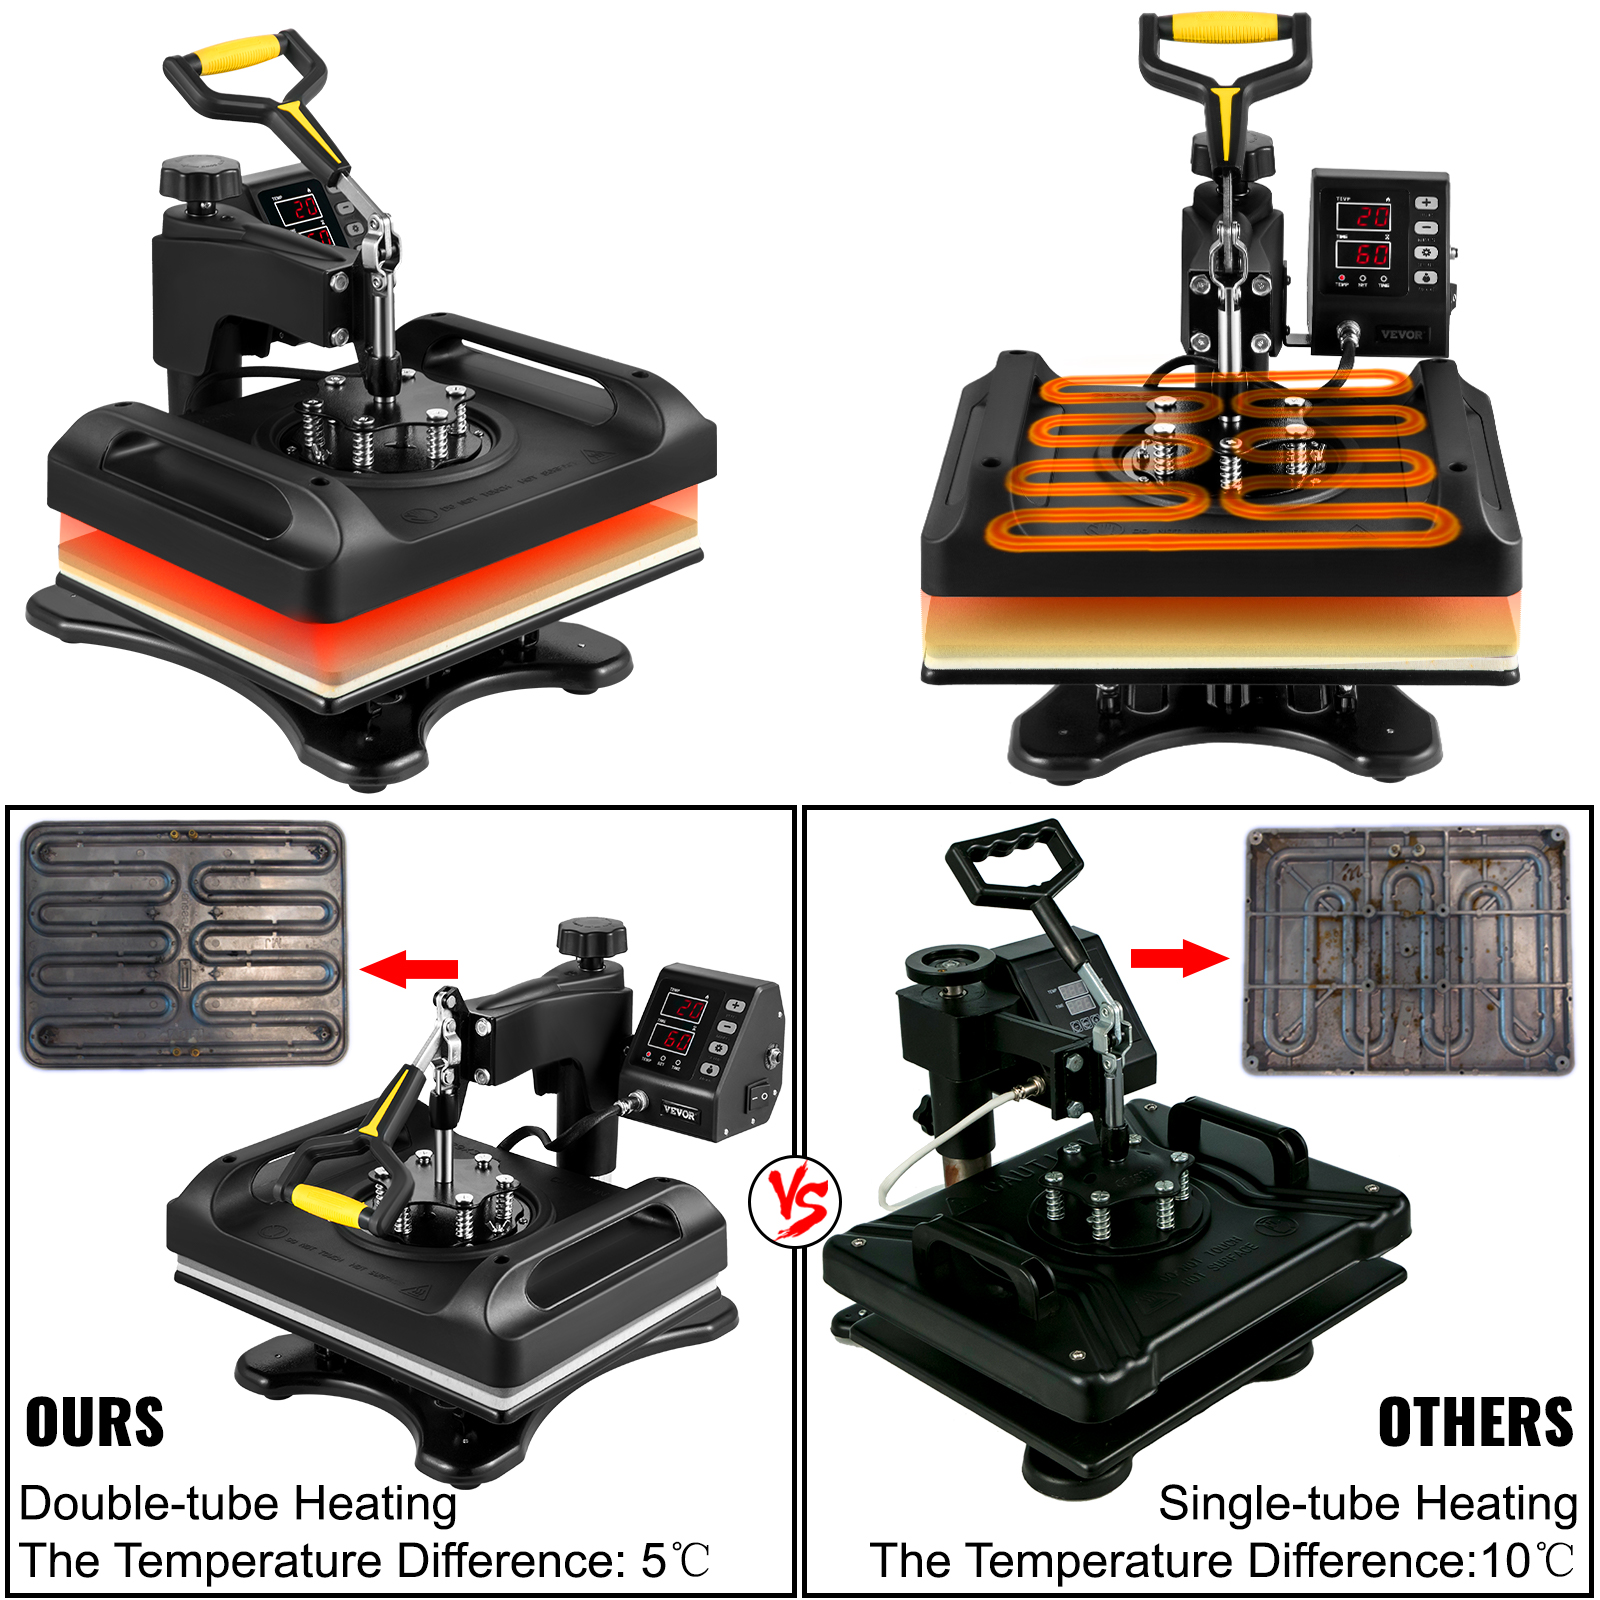 VEVOR 12 in. x 15 in. Heat Press Machine 5 in 1 Sublimation Transfer  Printer 360° Rotation for Shirts/Hats/Mugs/Sublimation XKTF91012155172EDV1  - The Home Depot